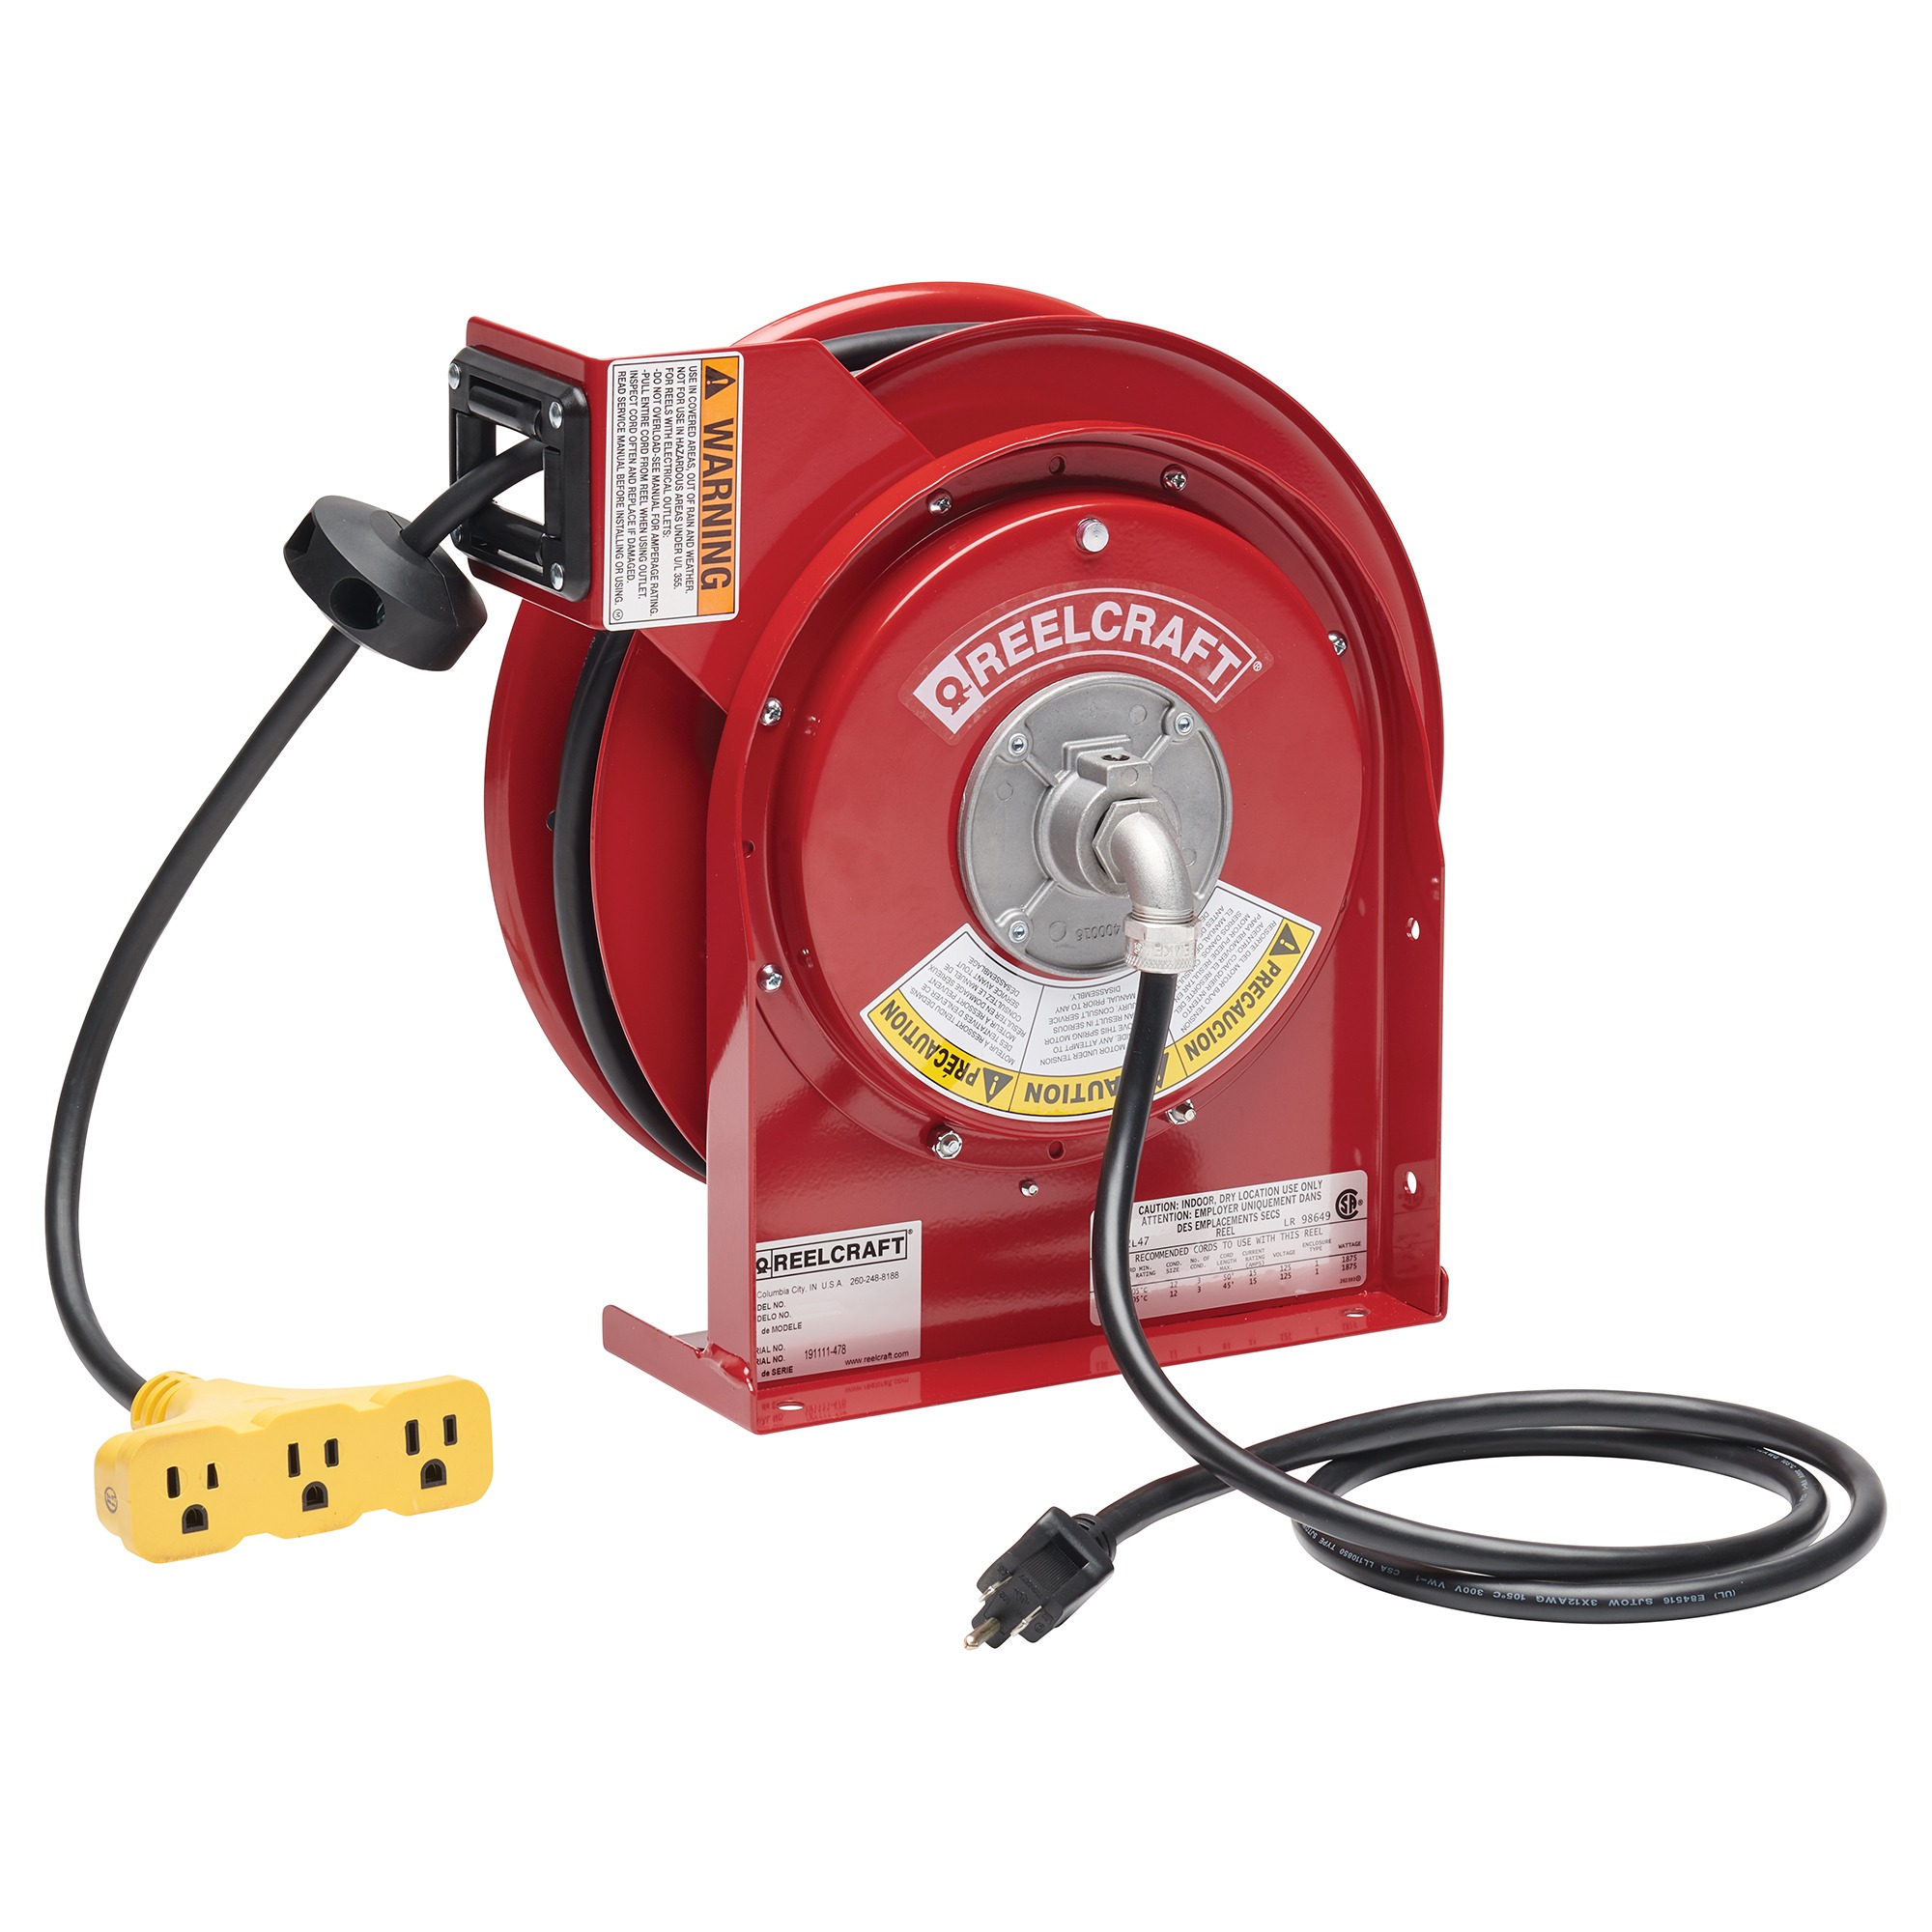 Reelcraft T-1460-0, Hand Crank 300 Amp Cable Welding Reel